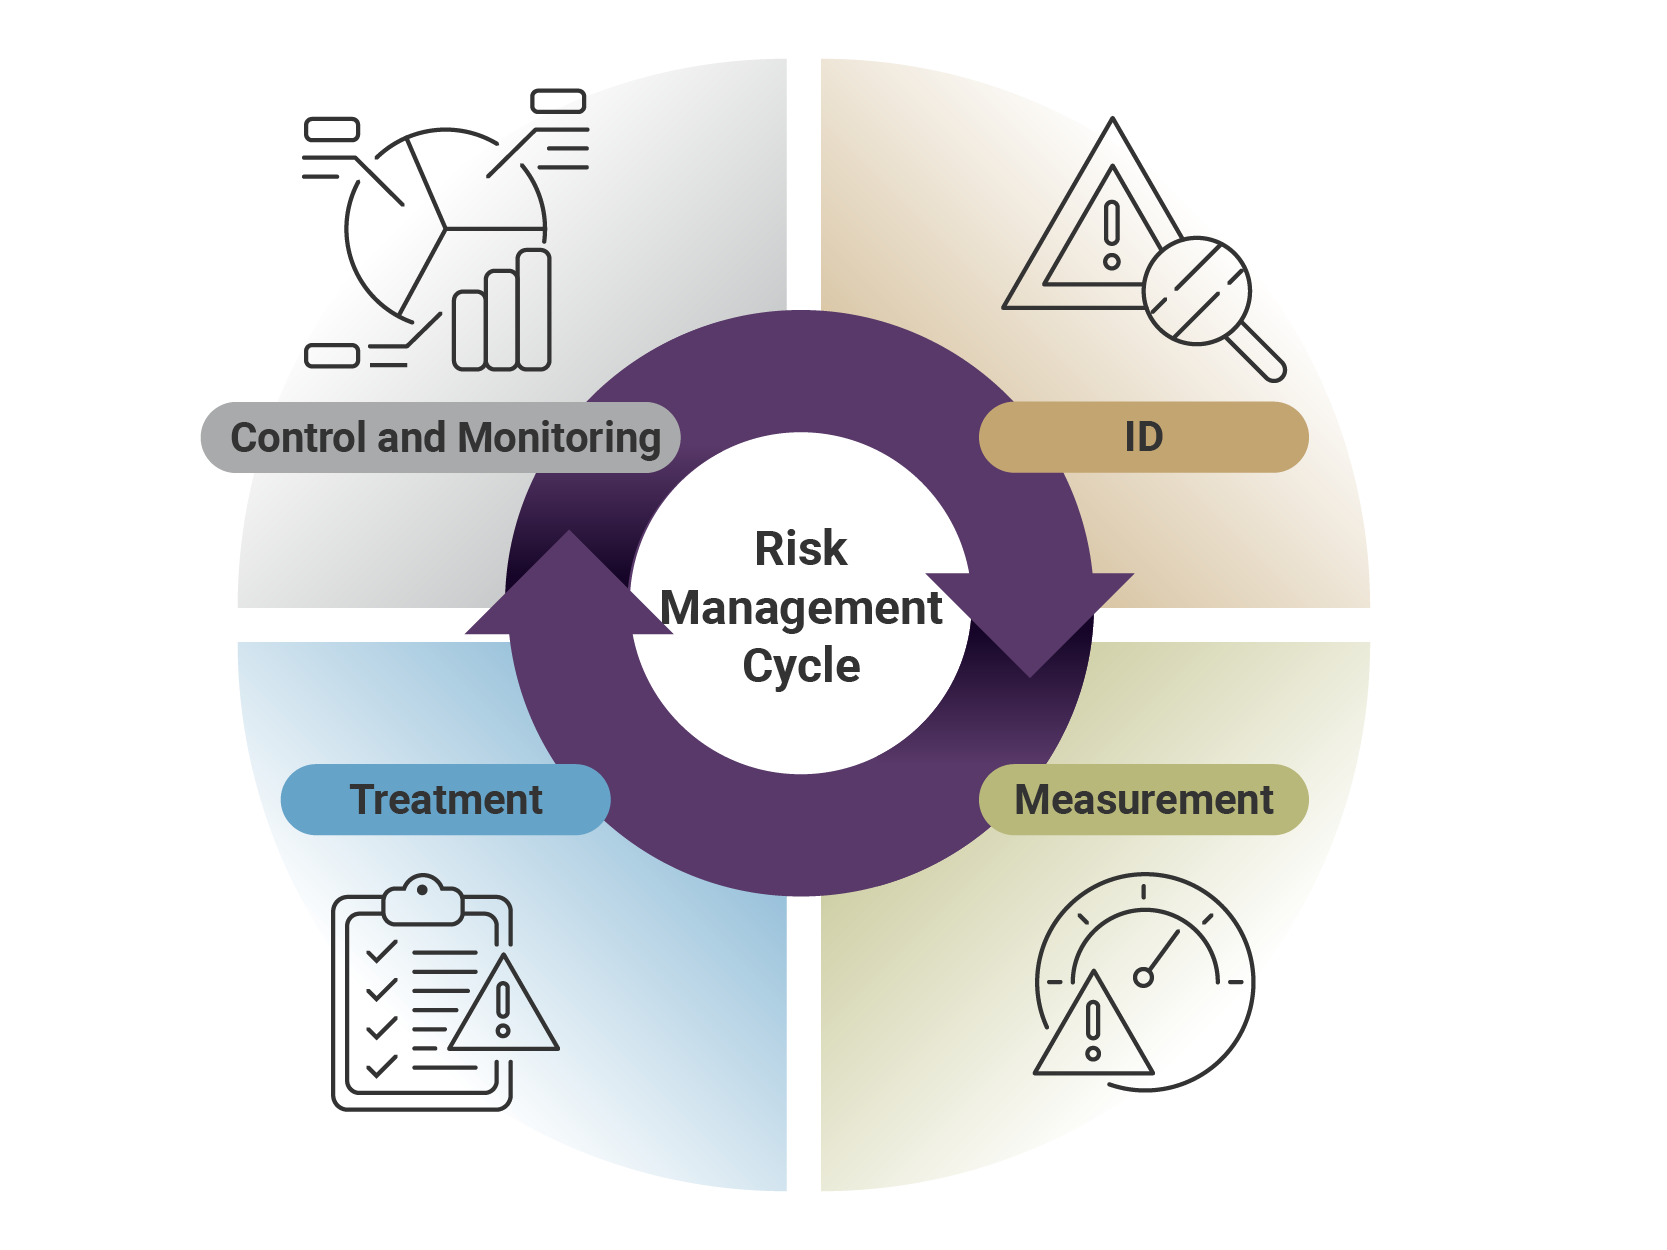 "The diagram shows the risk management cycle, which comprises the following stages: identification, measurement, treatment, and control and monitoring. "